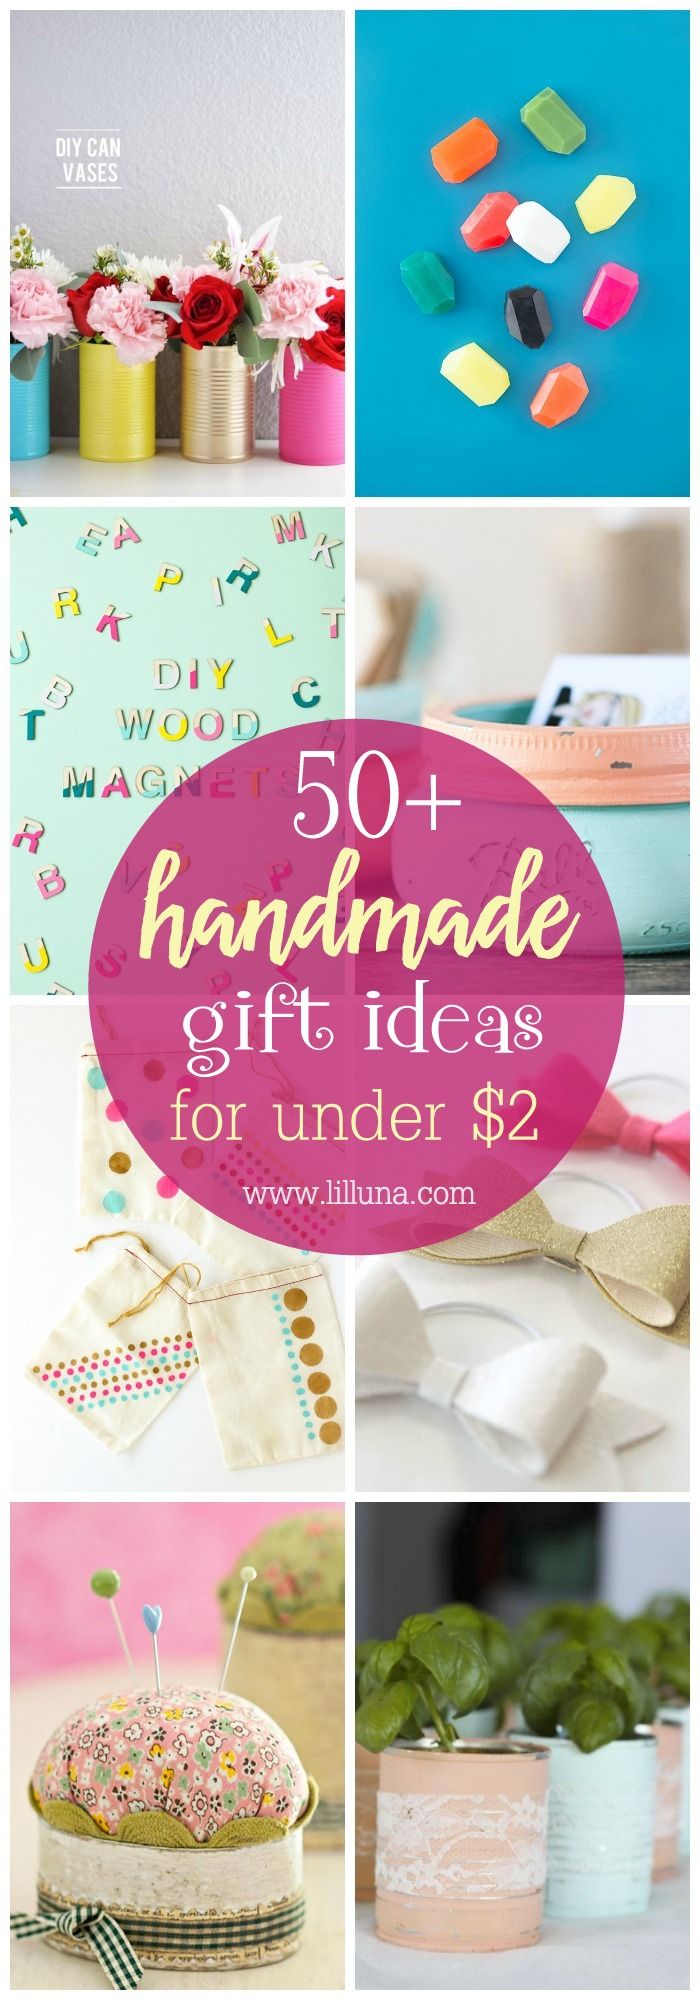 DIY Crafts - 50+ Handmade Gift Ideas that can all be made for under $2 ...